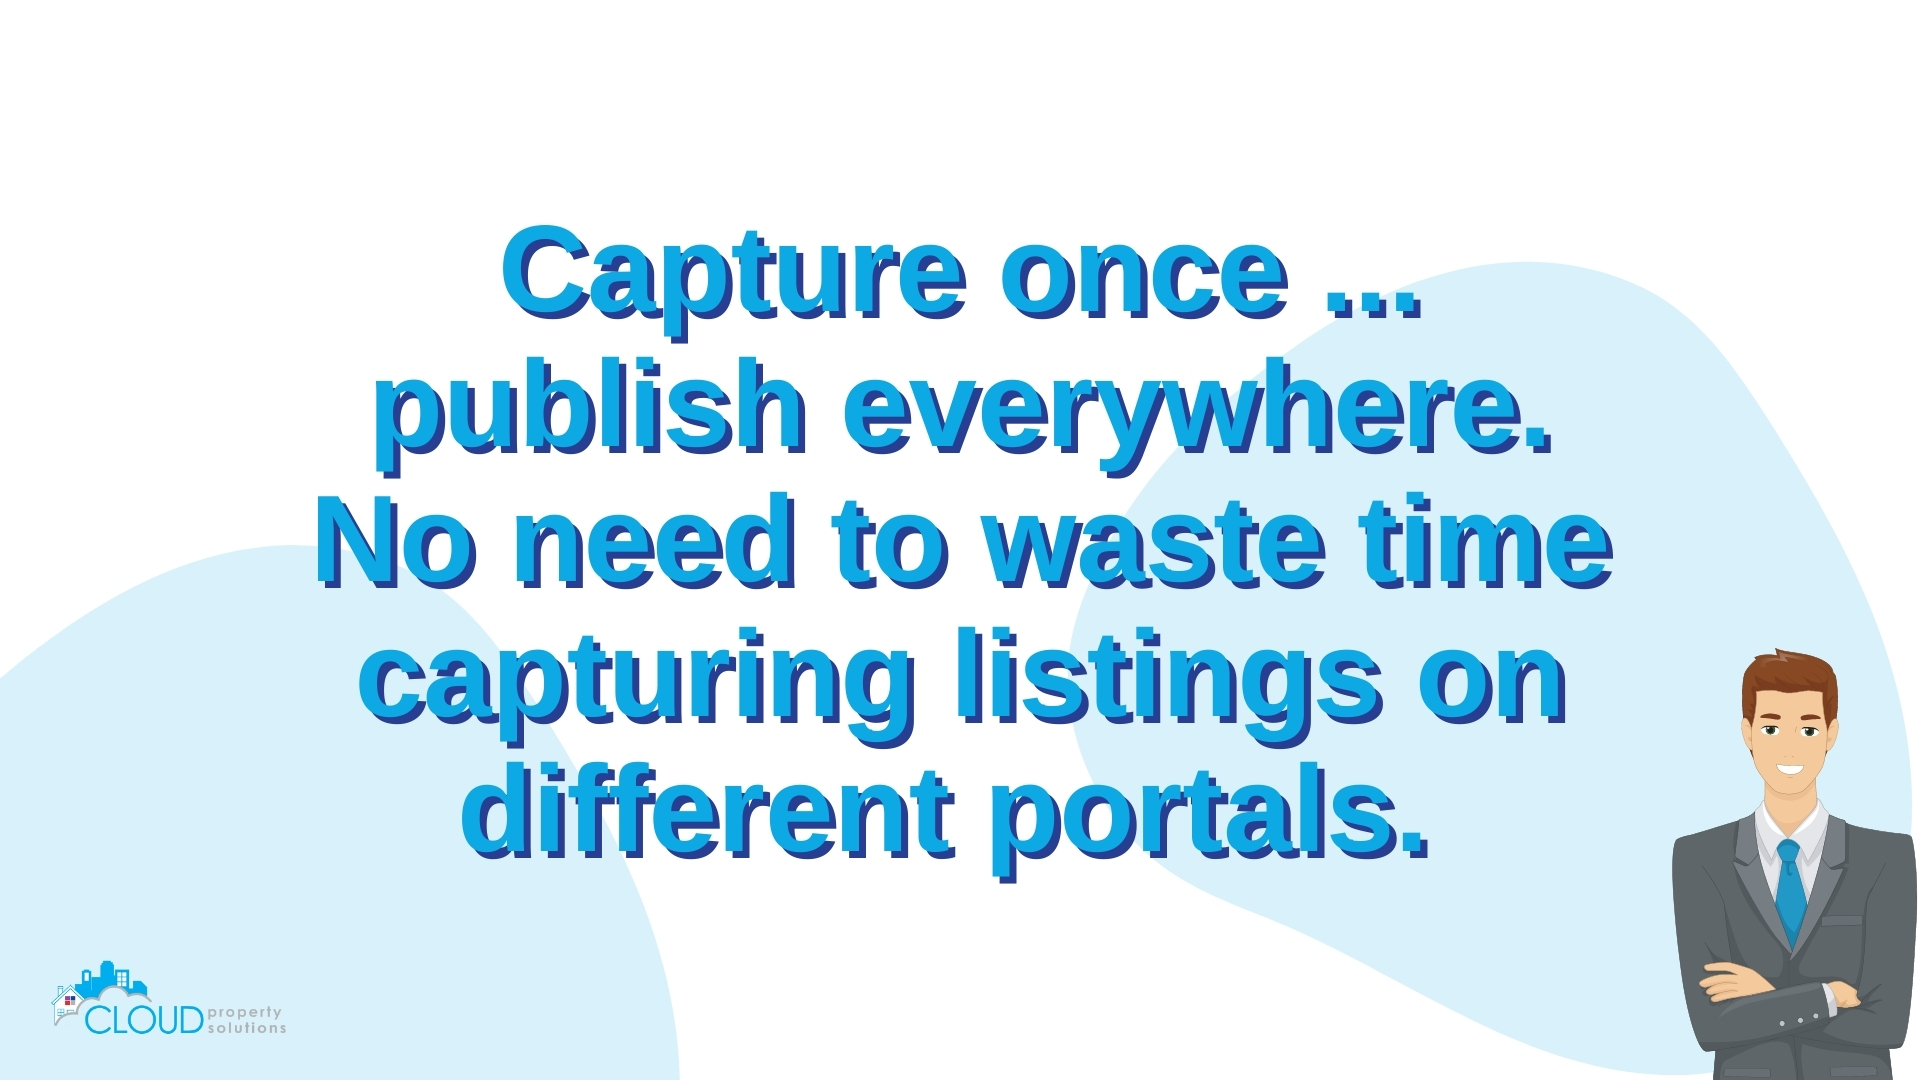 No need to capture listing information multiple times.